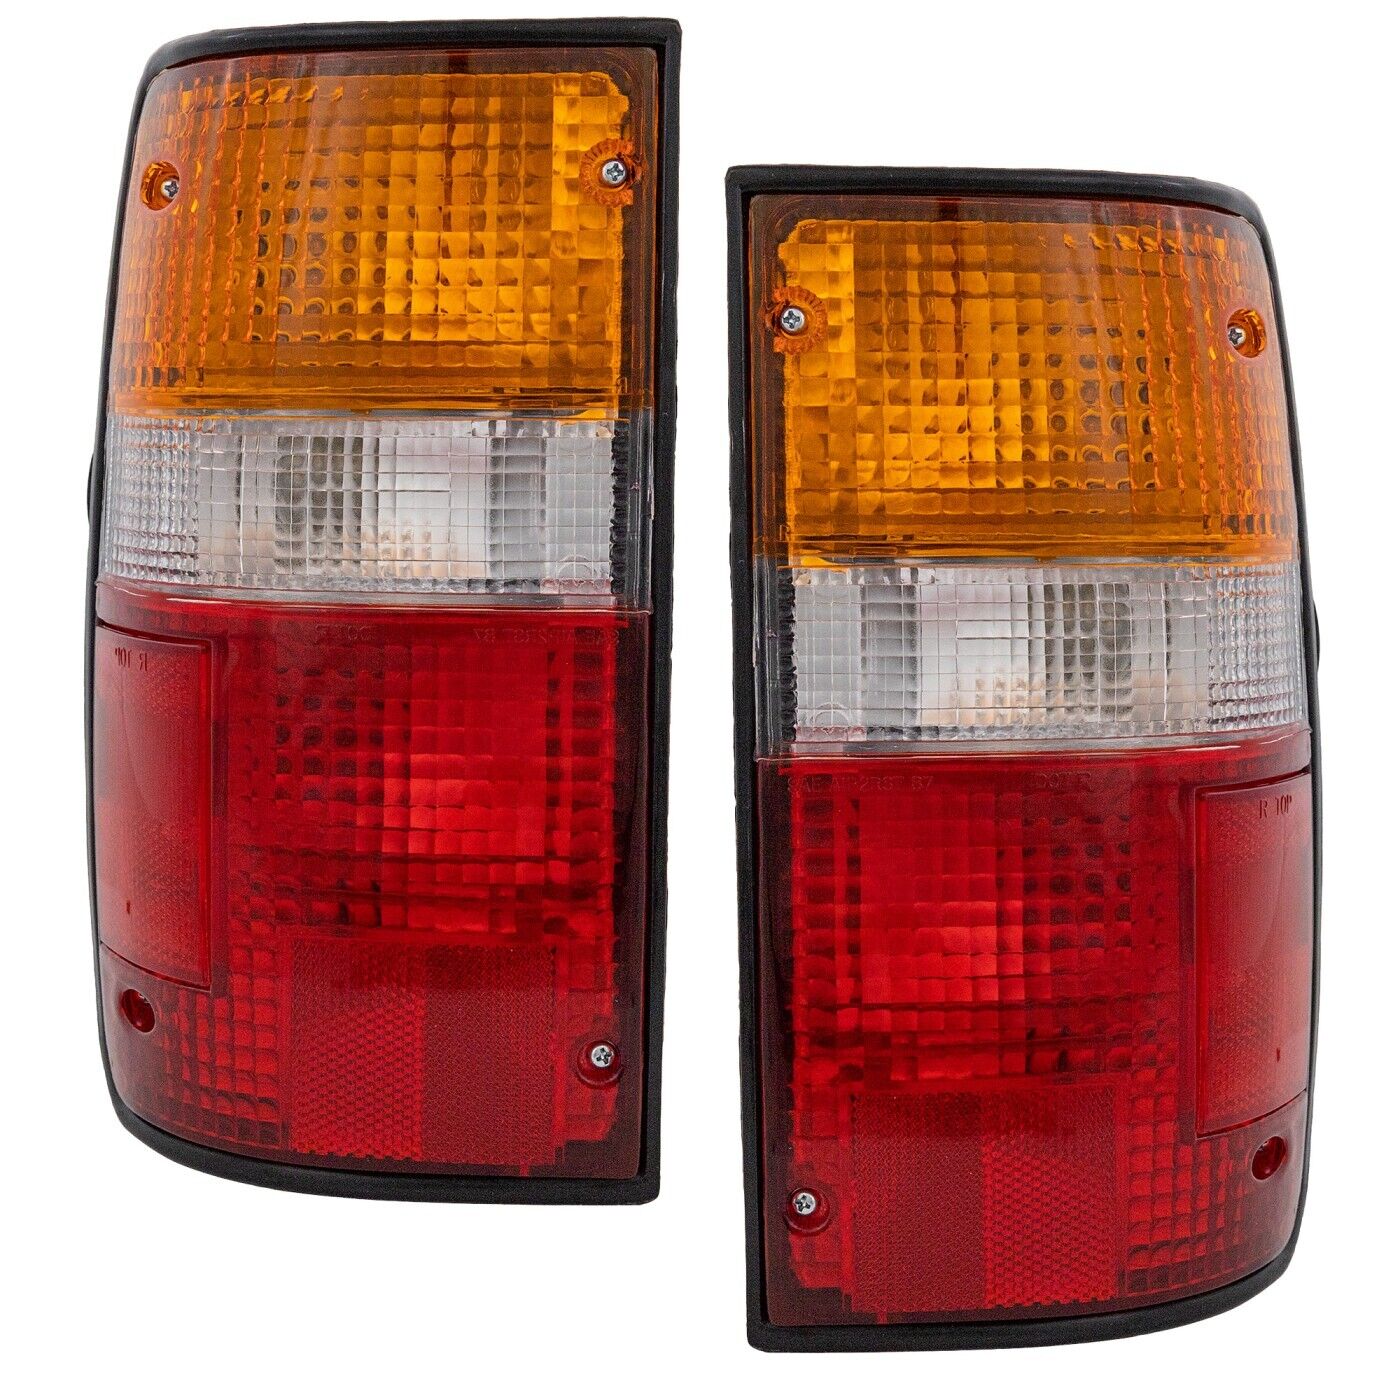 Pair Set of 2 Tail Lights Taillights Taillamps Brakelights  Driver & Passenger